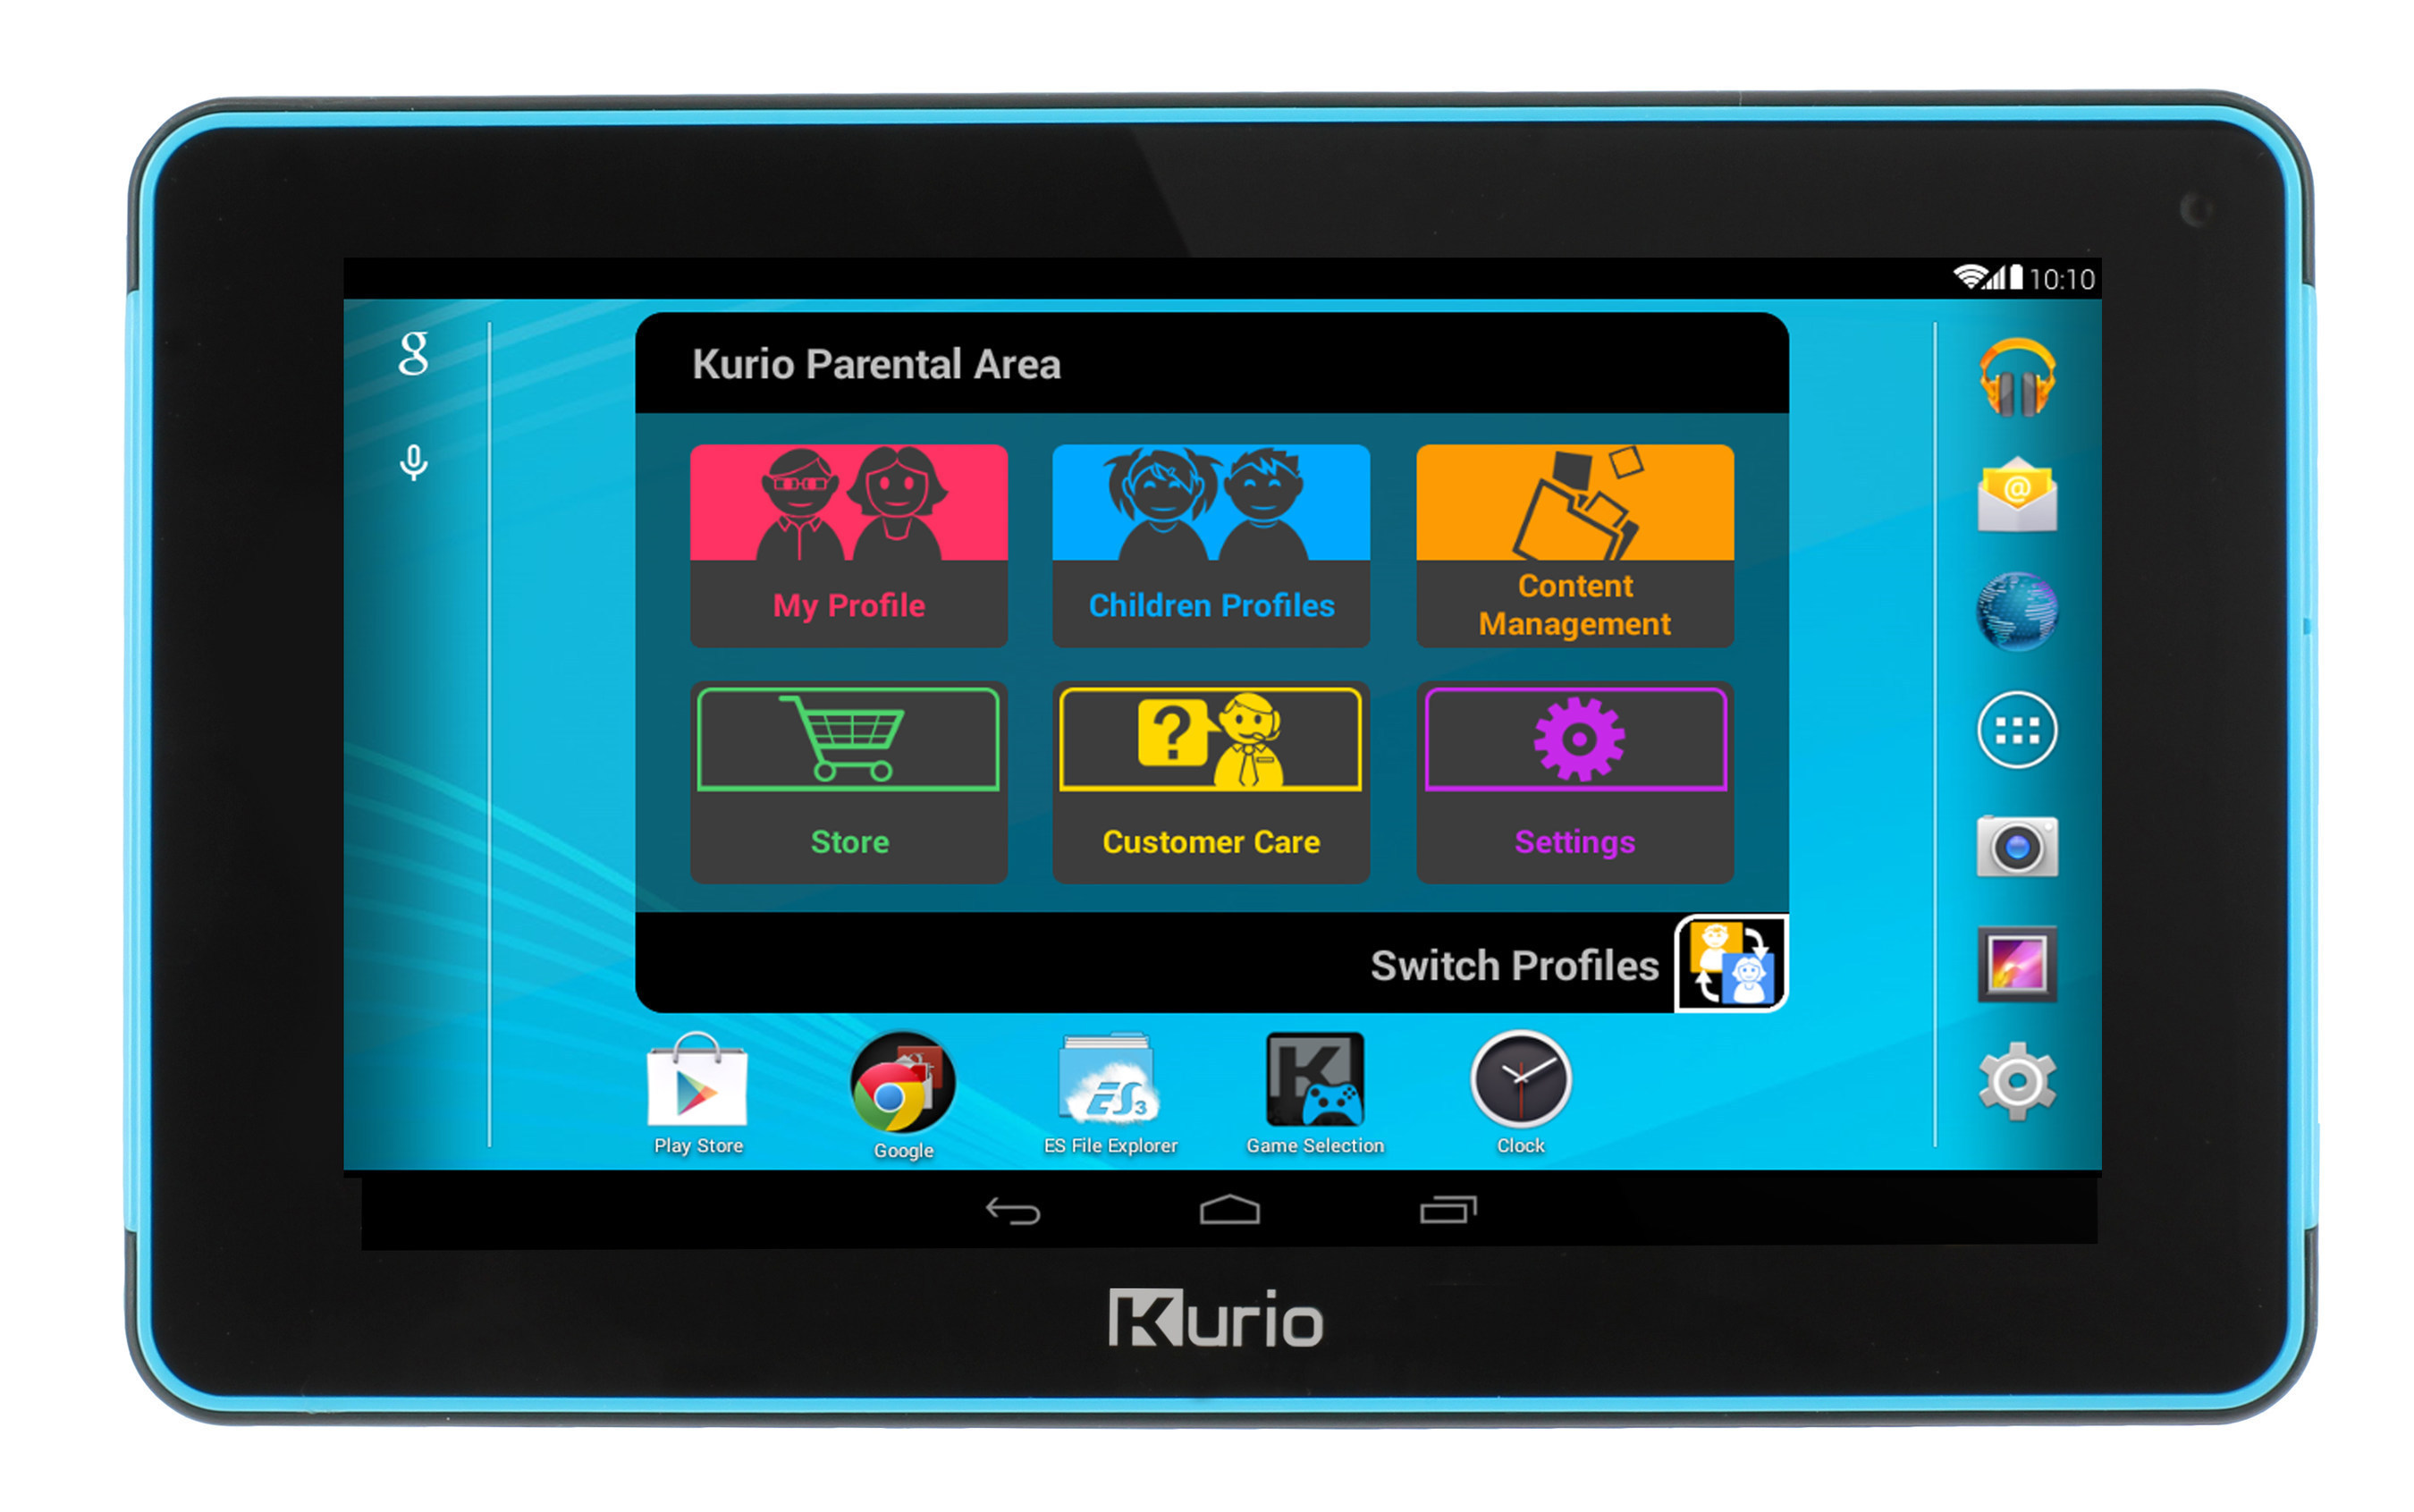 Kurio Xtreme adds a 24/7 Customer Care center, allowing parents to live chat with a tech expert right from the tablet or even to allow the technician to take over the tablet remotely to resolve any issues. It also comes with everything parents have come to expect and trust from Kurio: Kurio Genius kid-safe web surfing, advanced time controls, app management and advertisement controls, creation of up to eight completely independent user profiles, and a password-protected Kurio Parental Area. (PRNewsFoto/Techno Source)